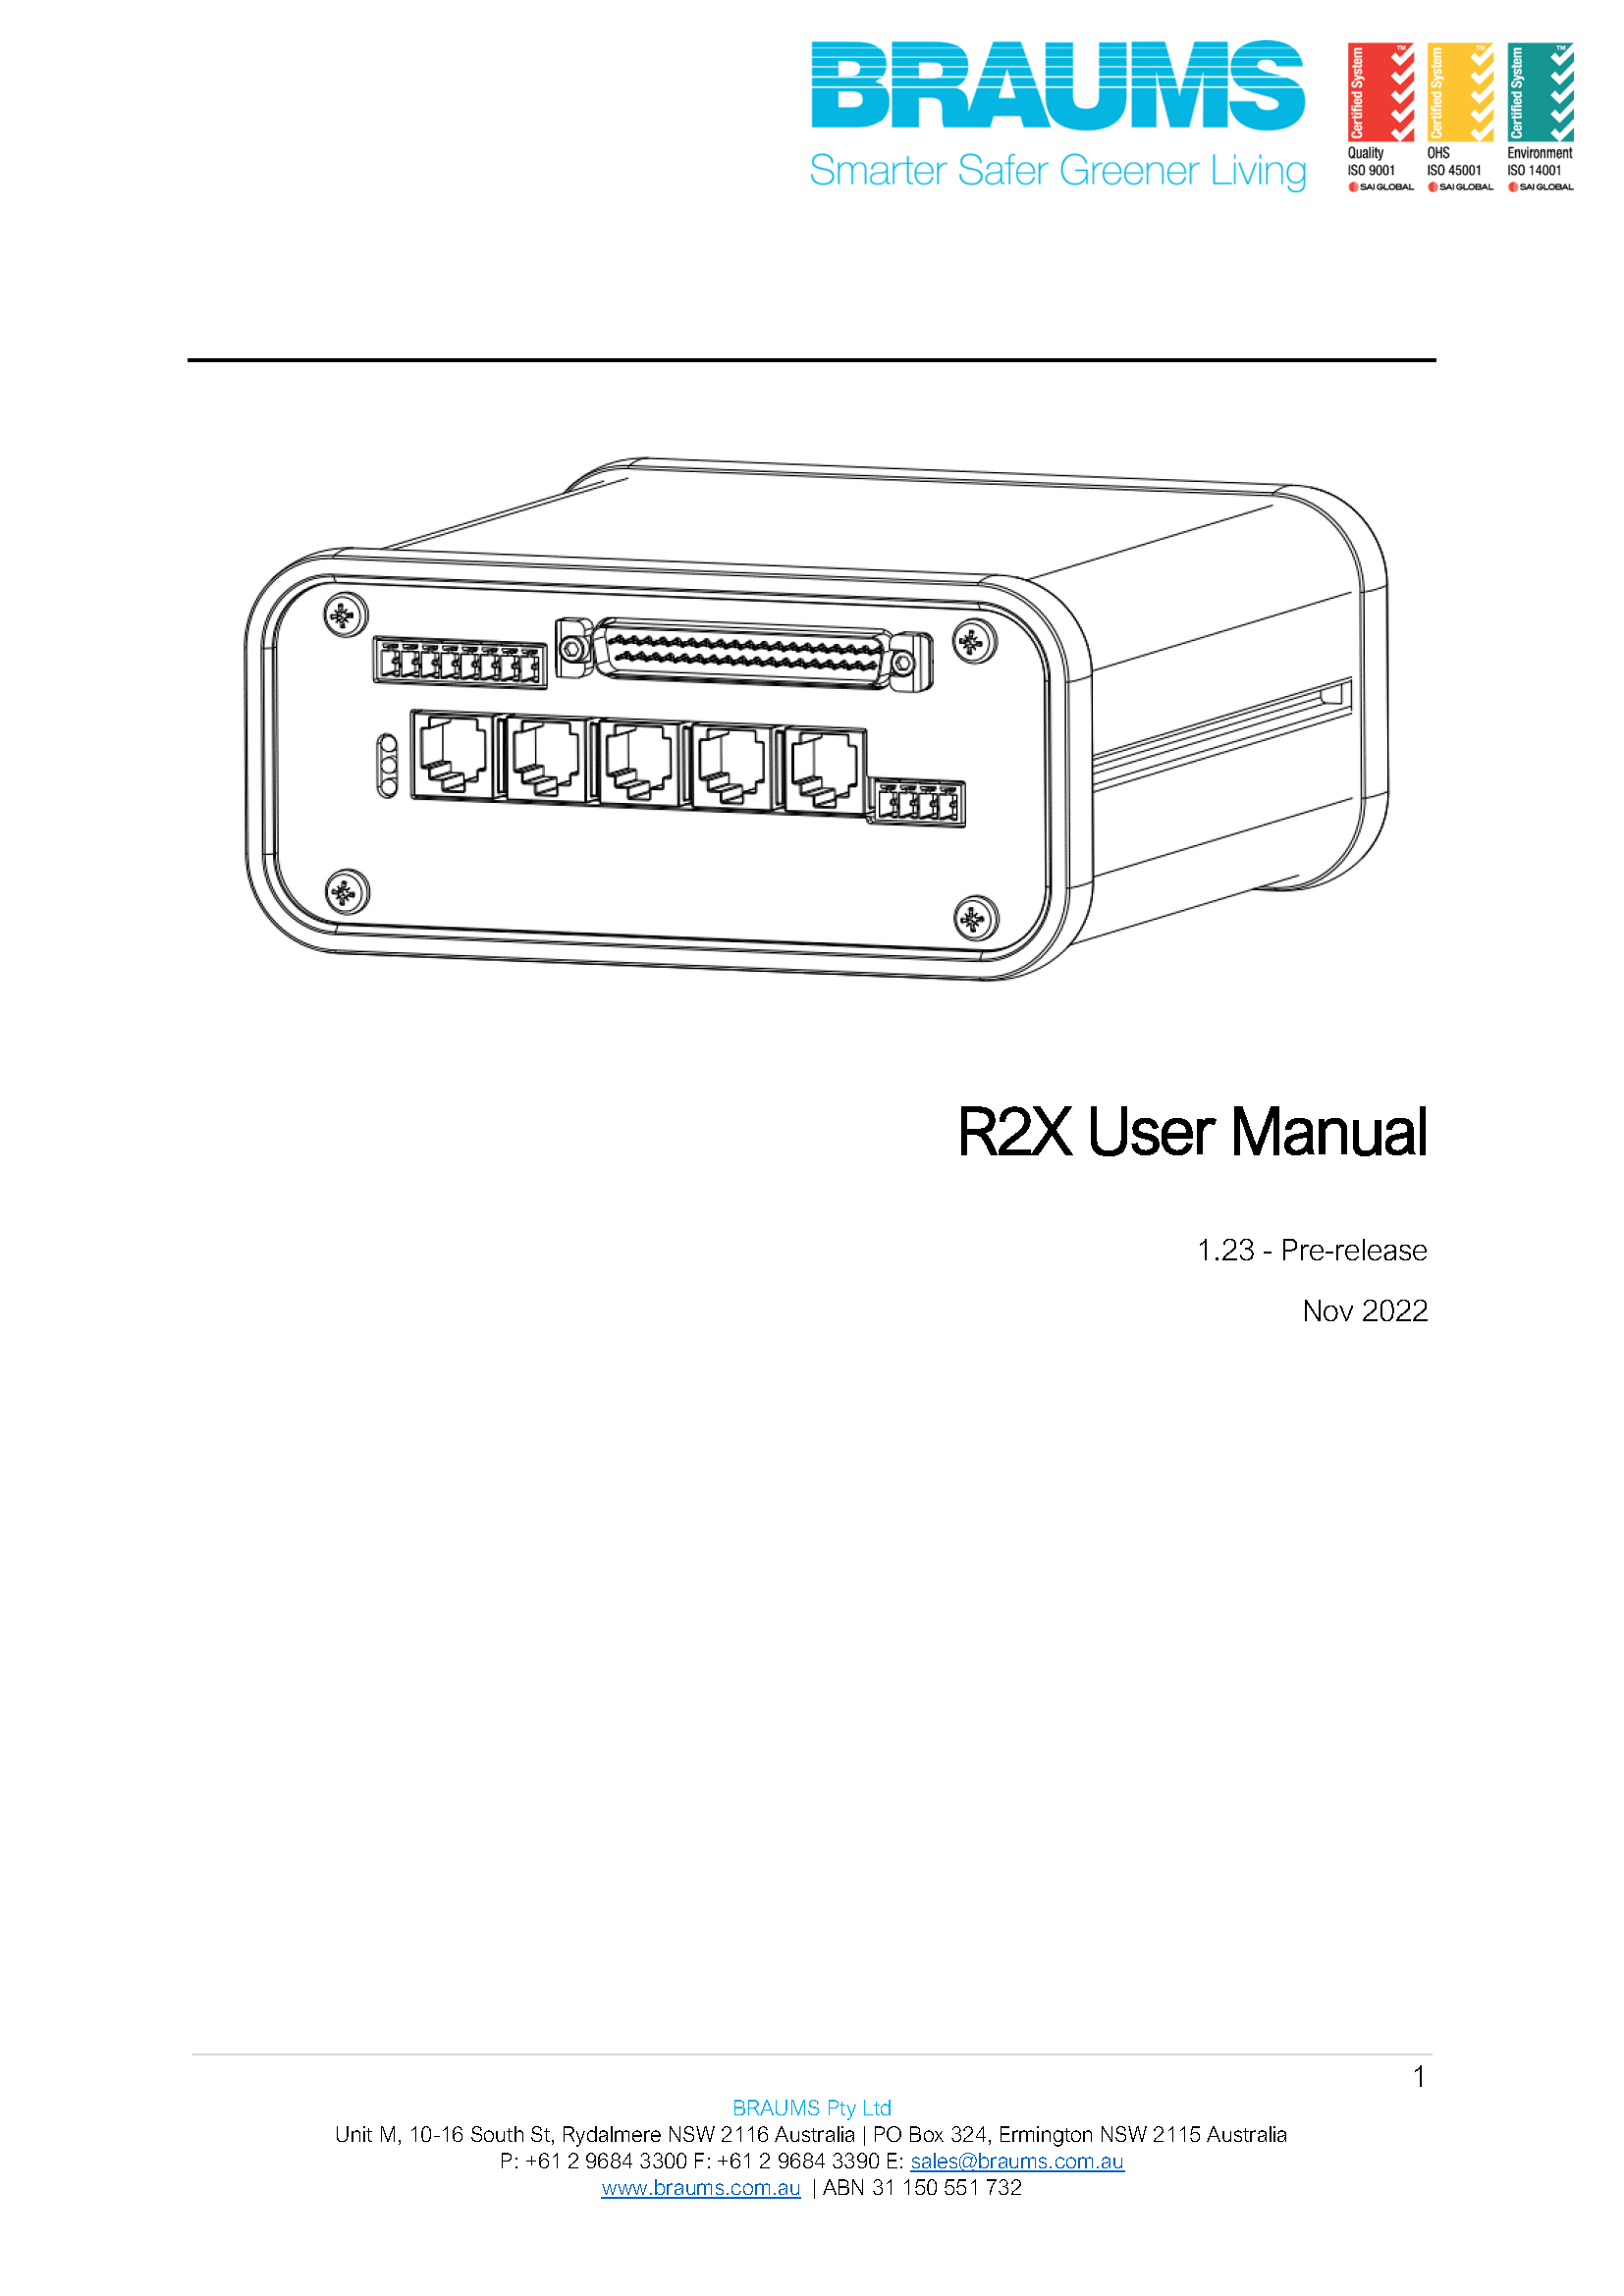 R2X User Manual Cover Page